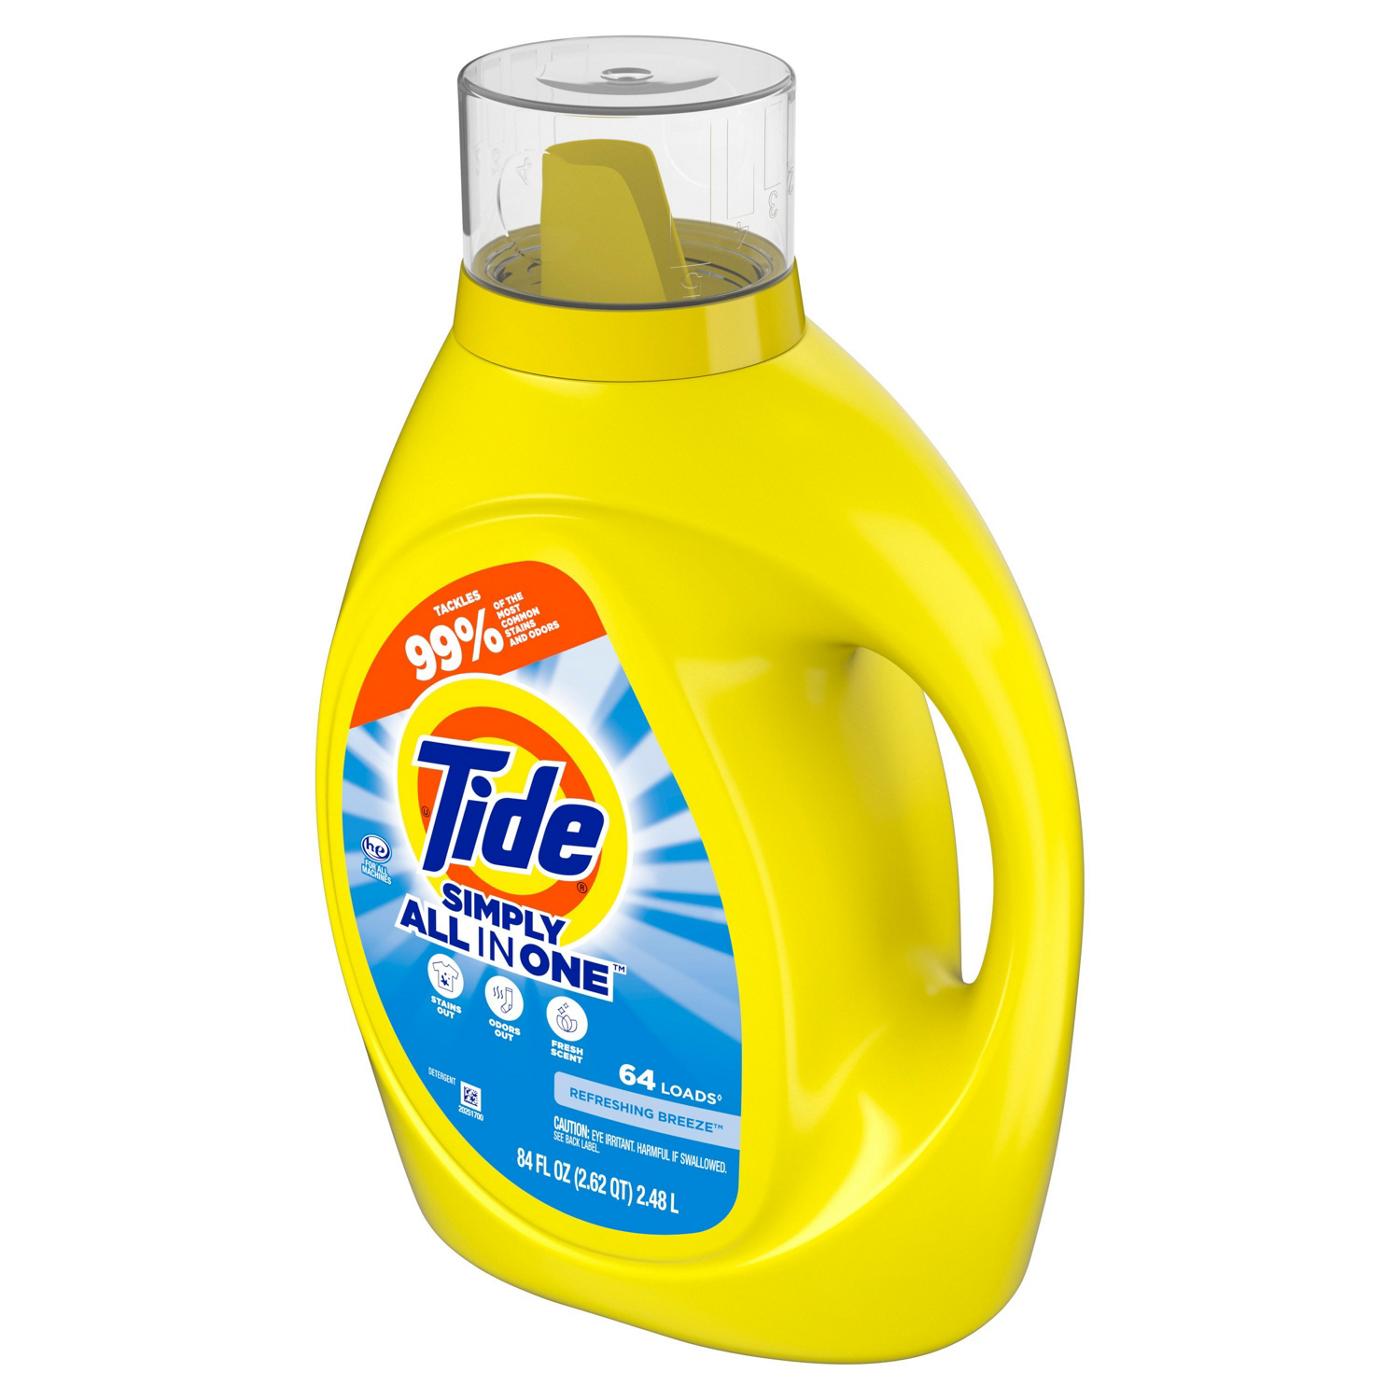 Tide Simply Clean & Fresh HE Liquid Laundry Detergent, 64 Loads - Refreshing Breeze; image 7 of 15